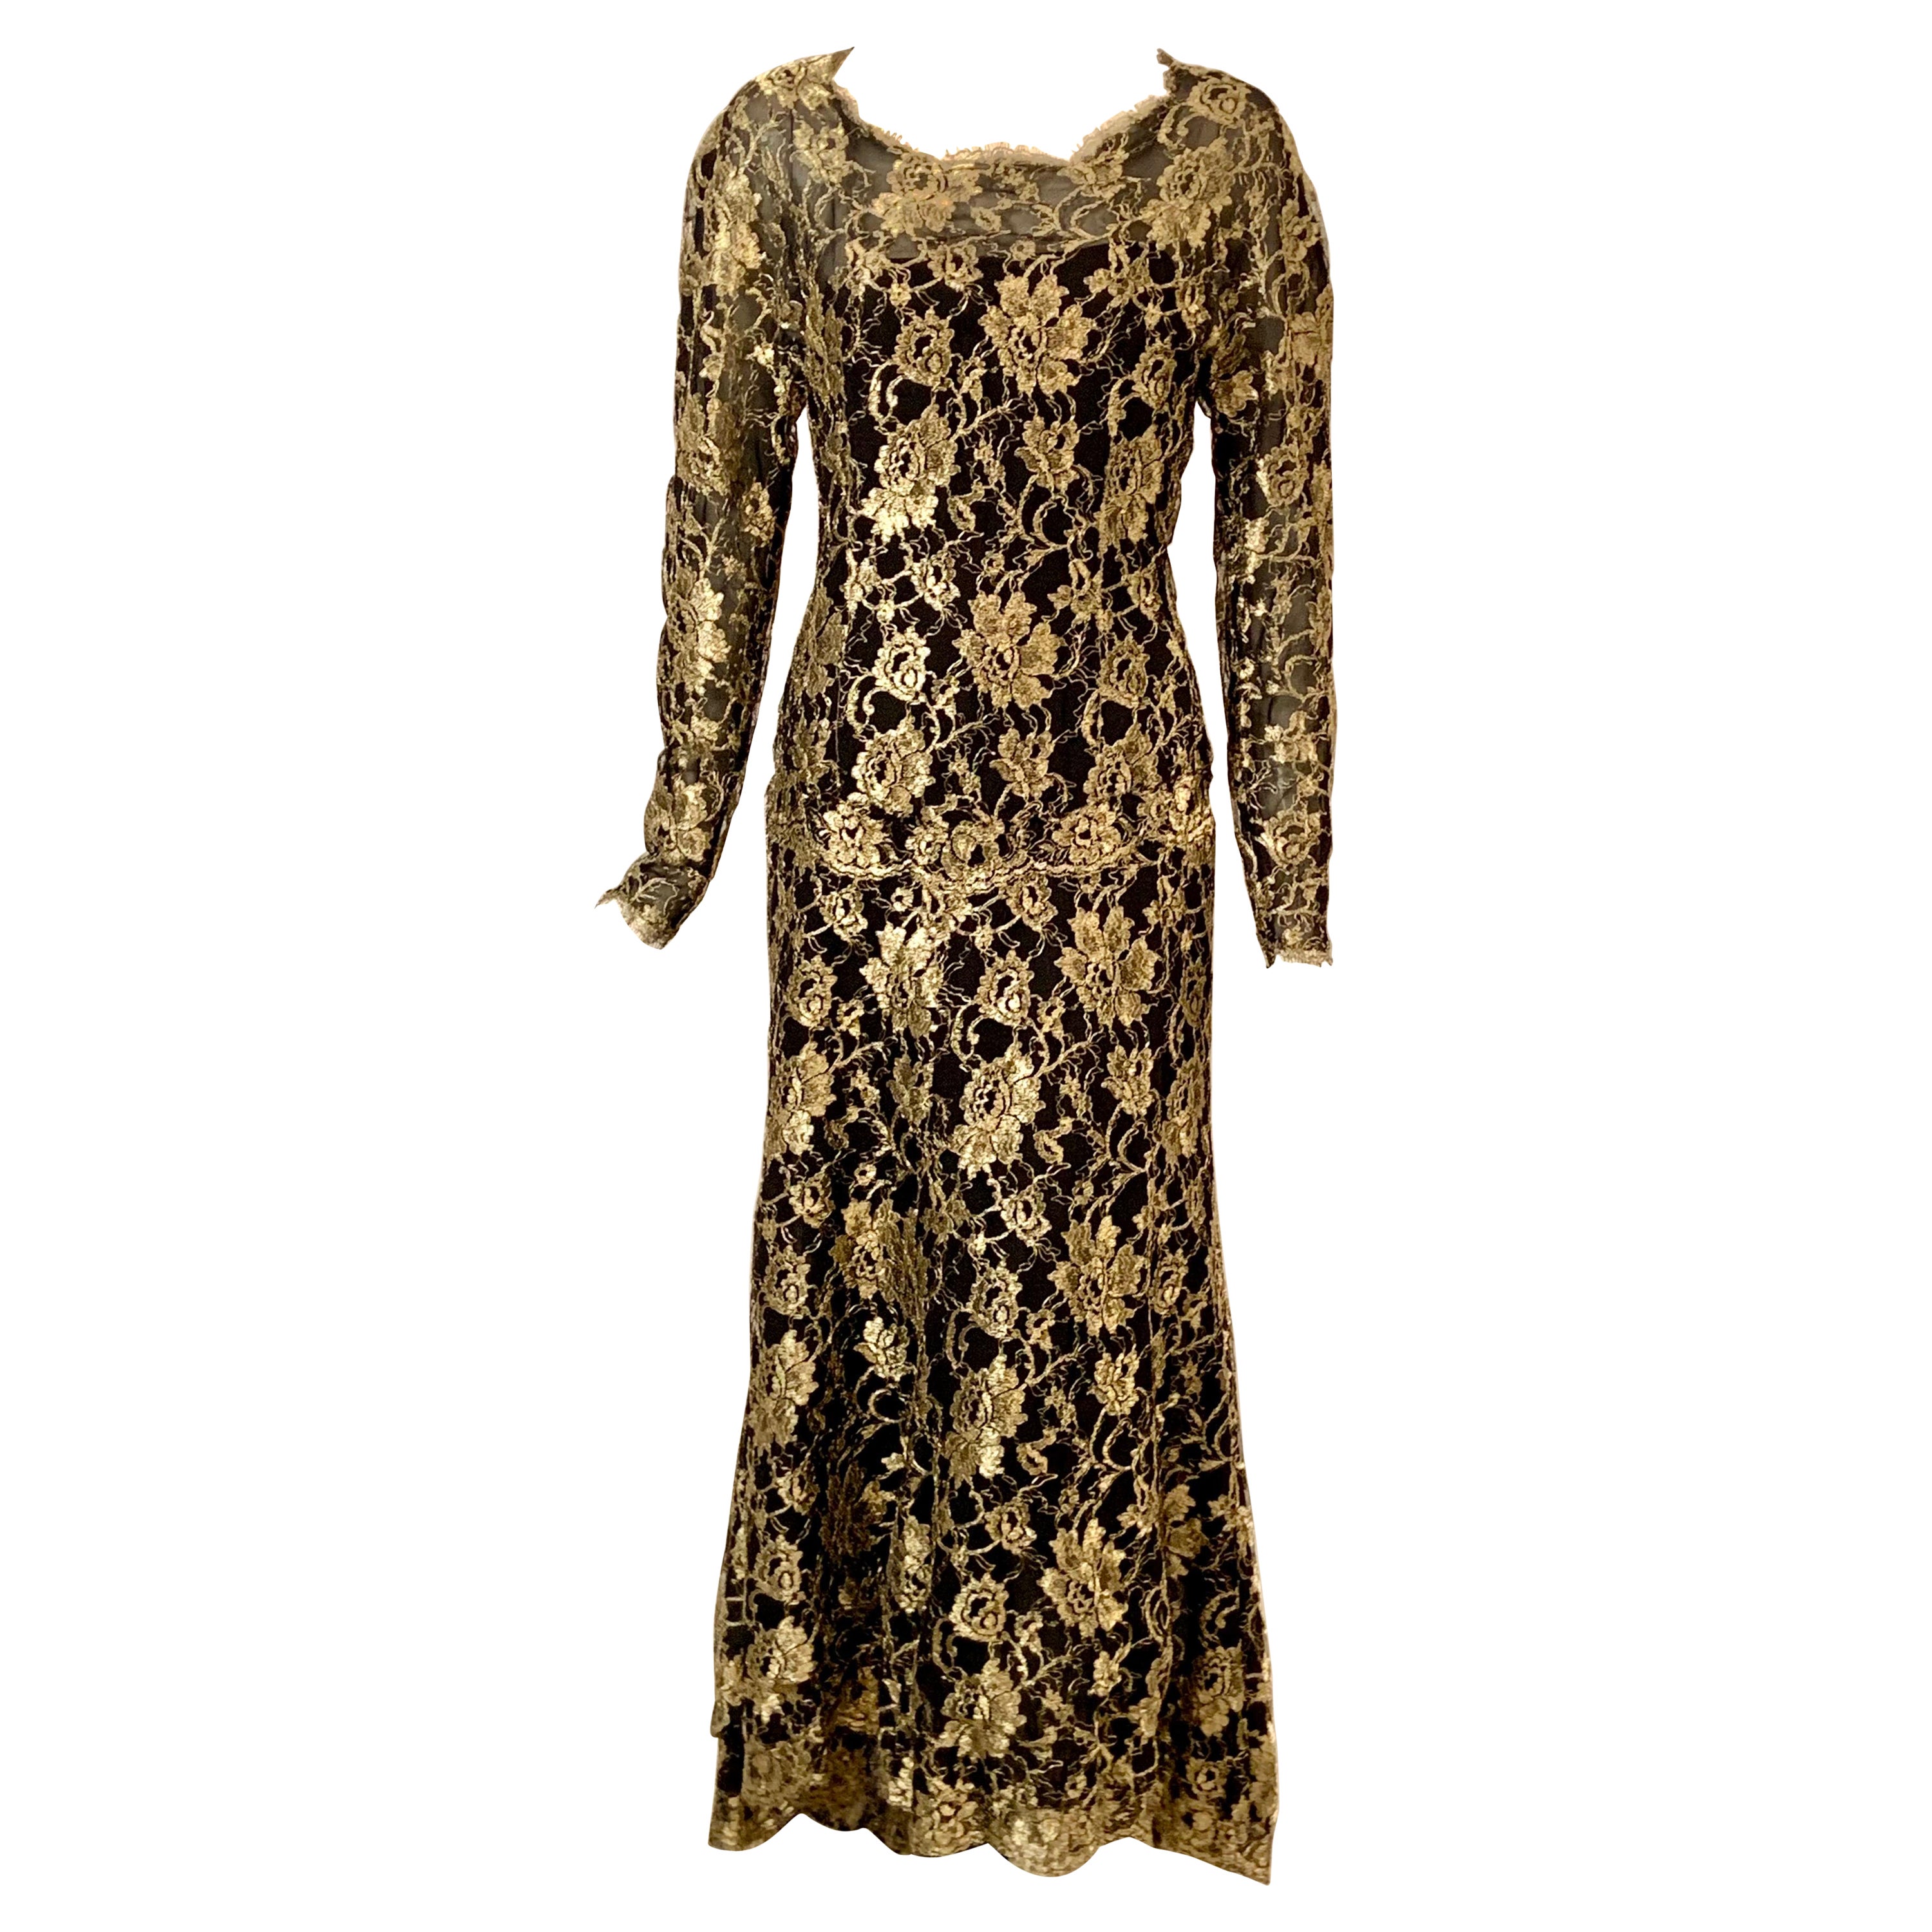 1986 Chanel by Karl Lagerfeld Gold and Black Lace Gown with Train Original Tag For Sale